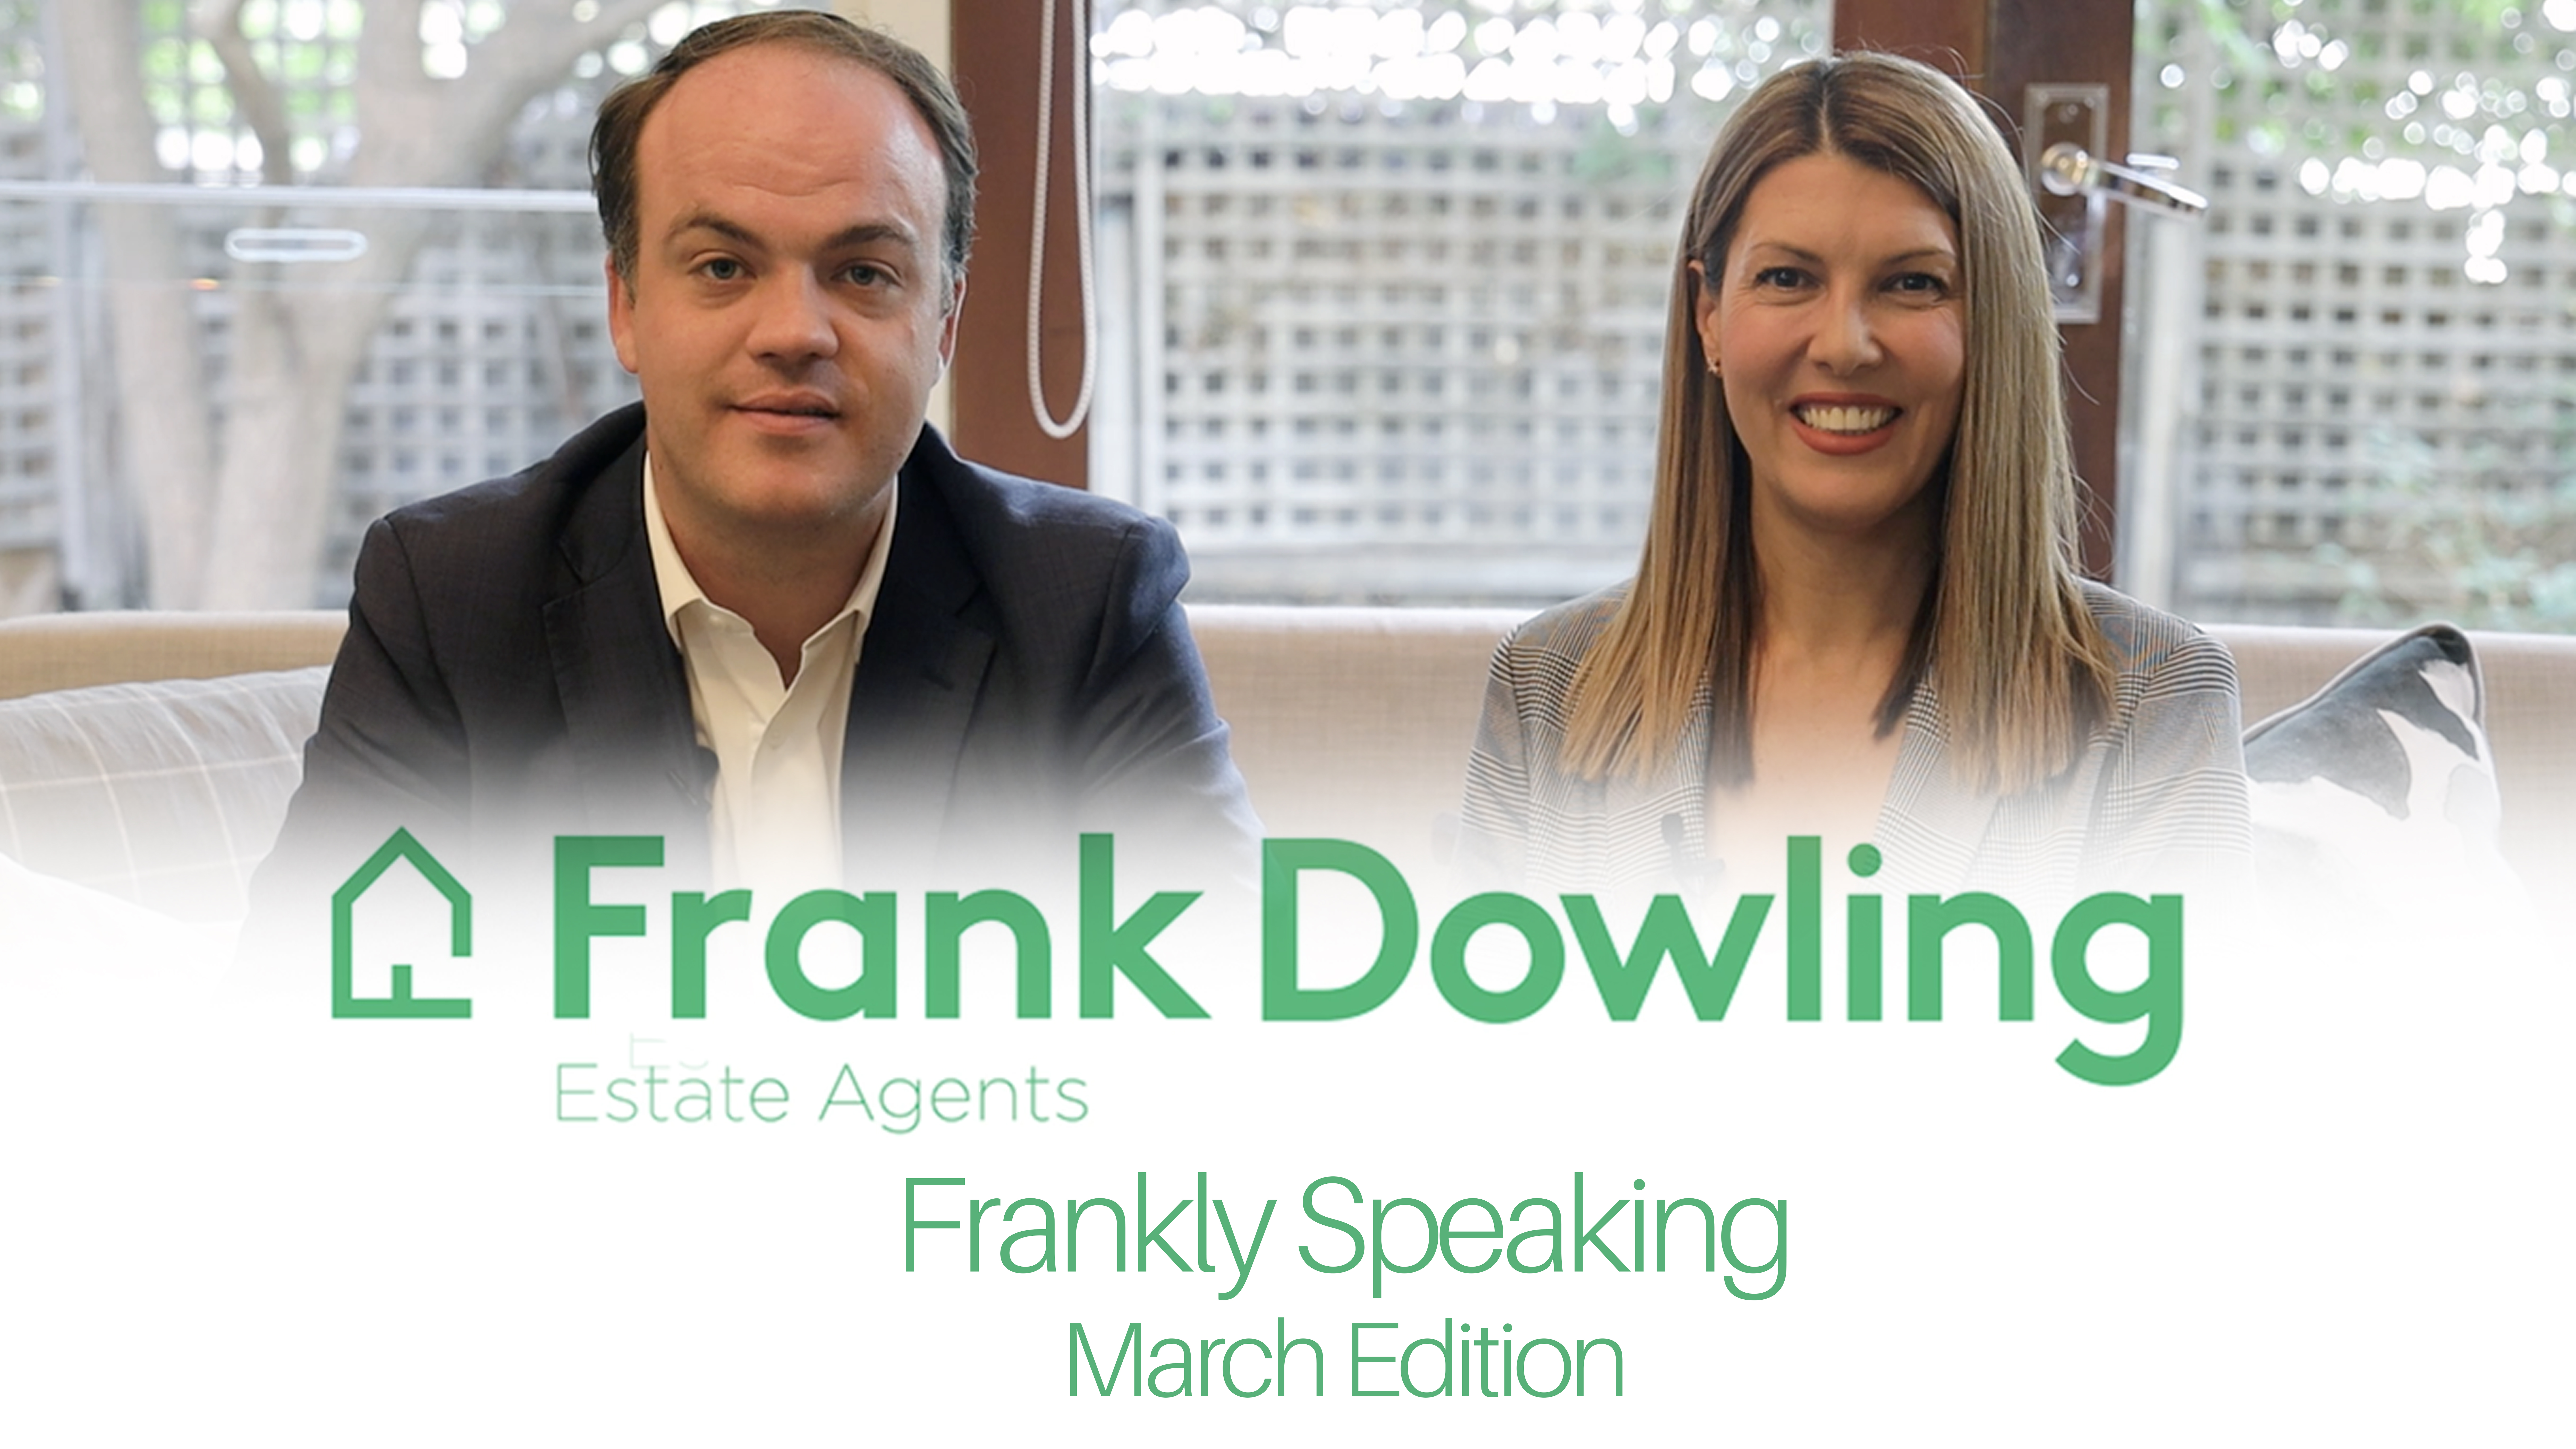 Frankly Speaking March 2020